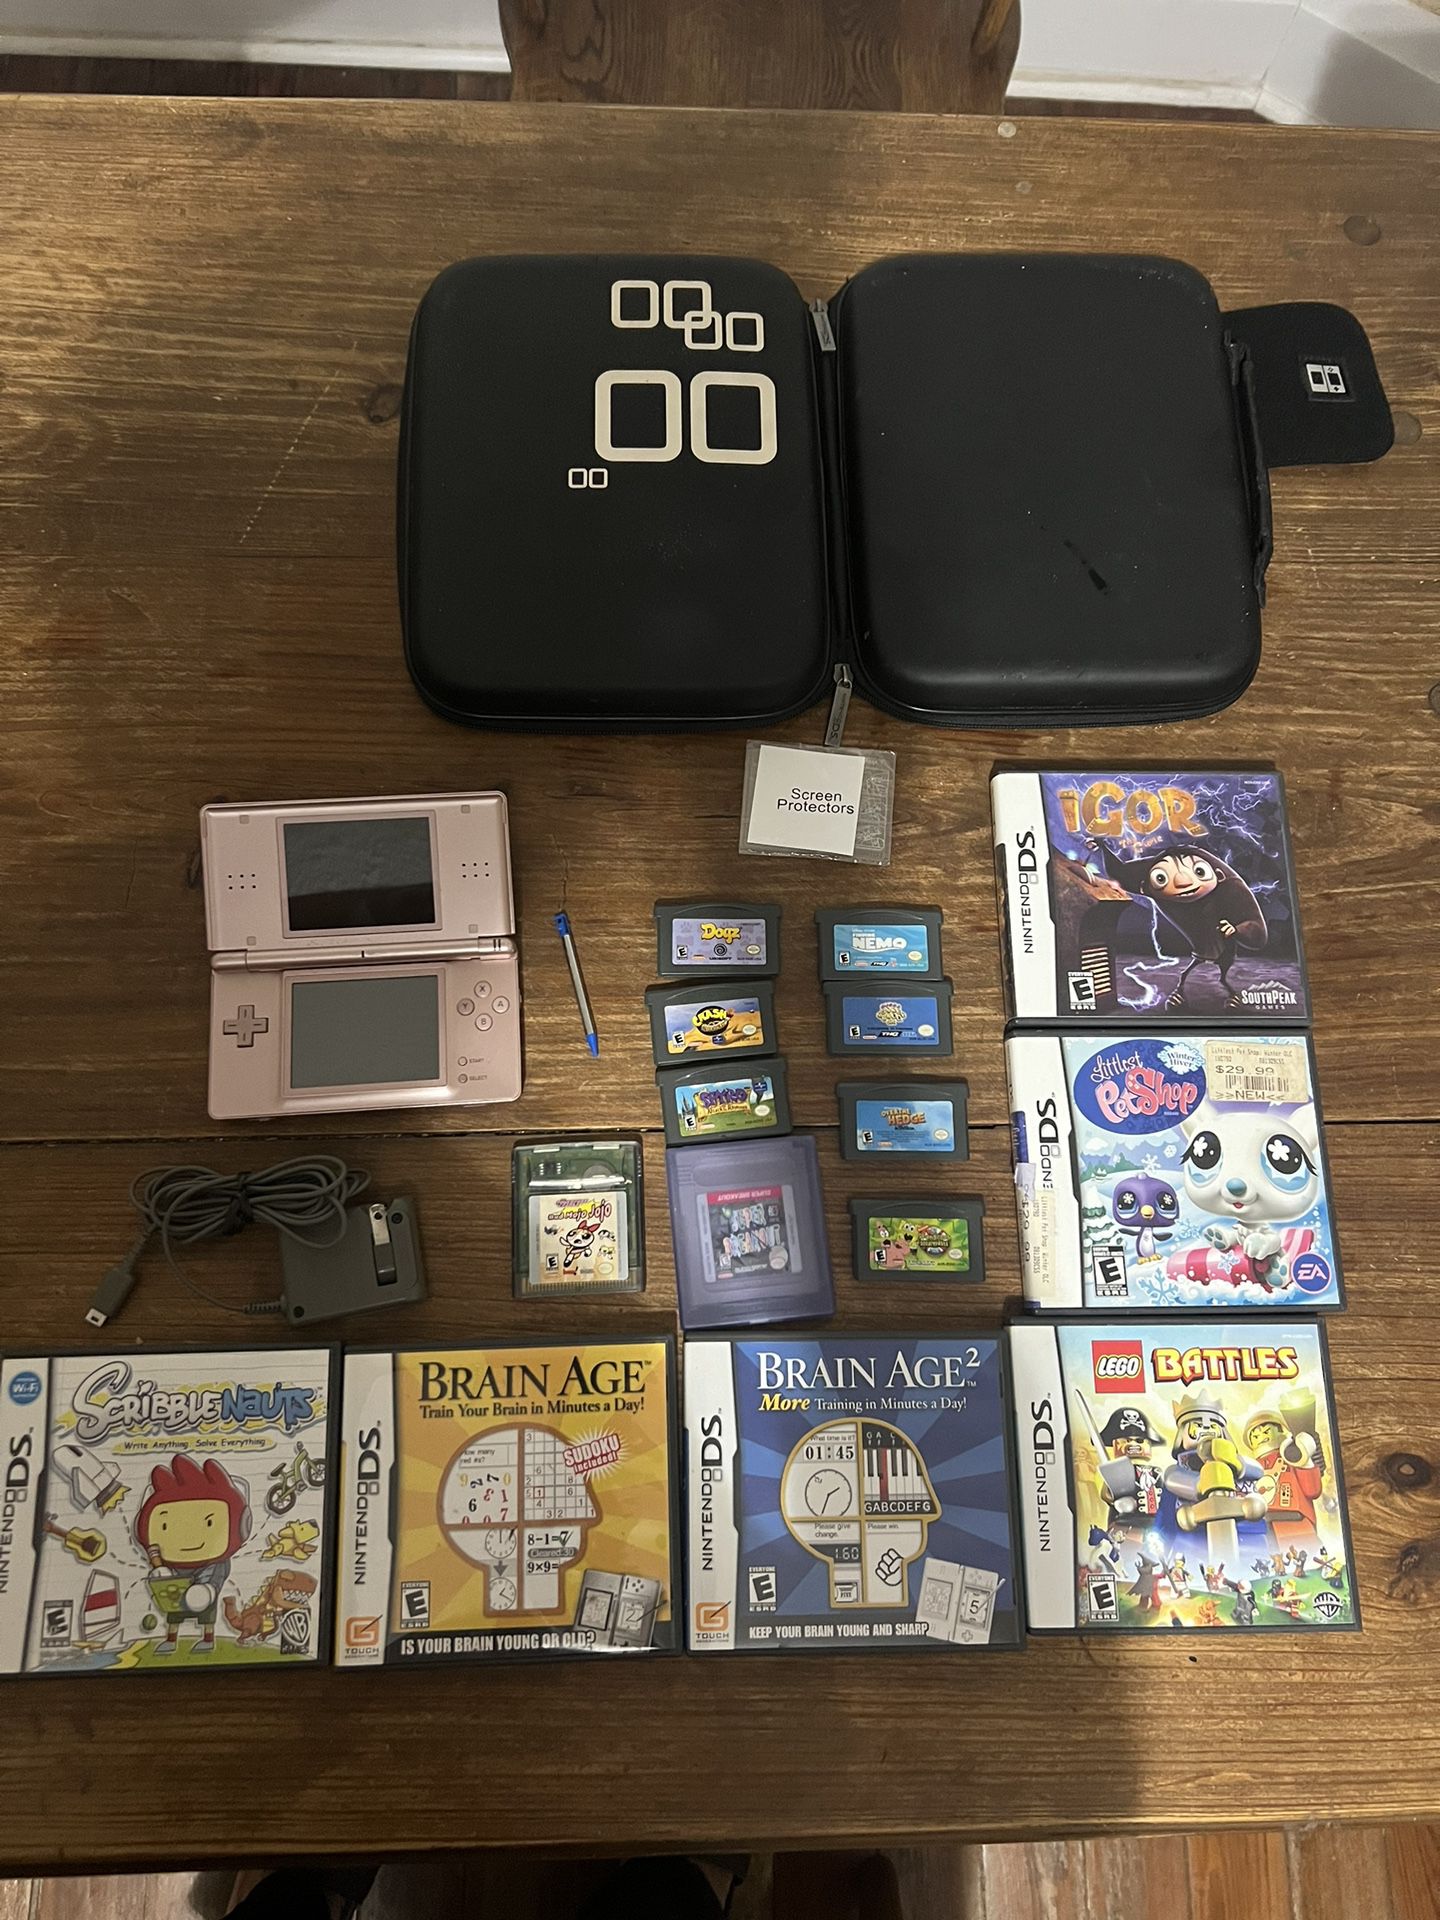 Nintendo Ds 24 Games And Case